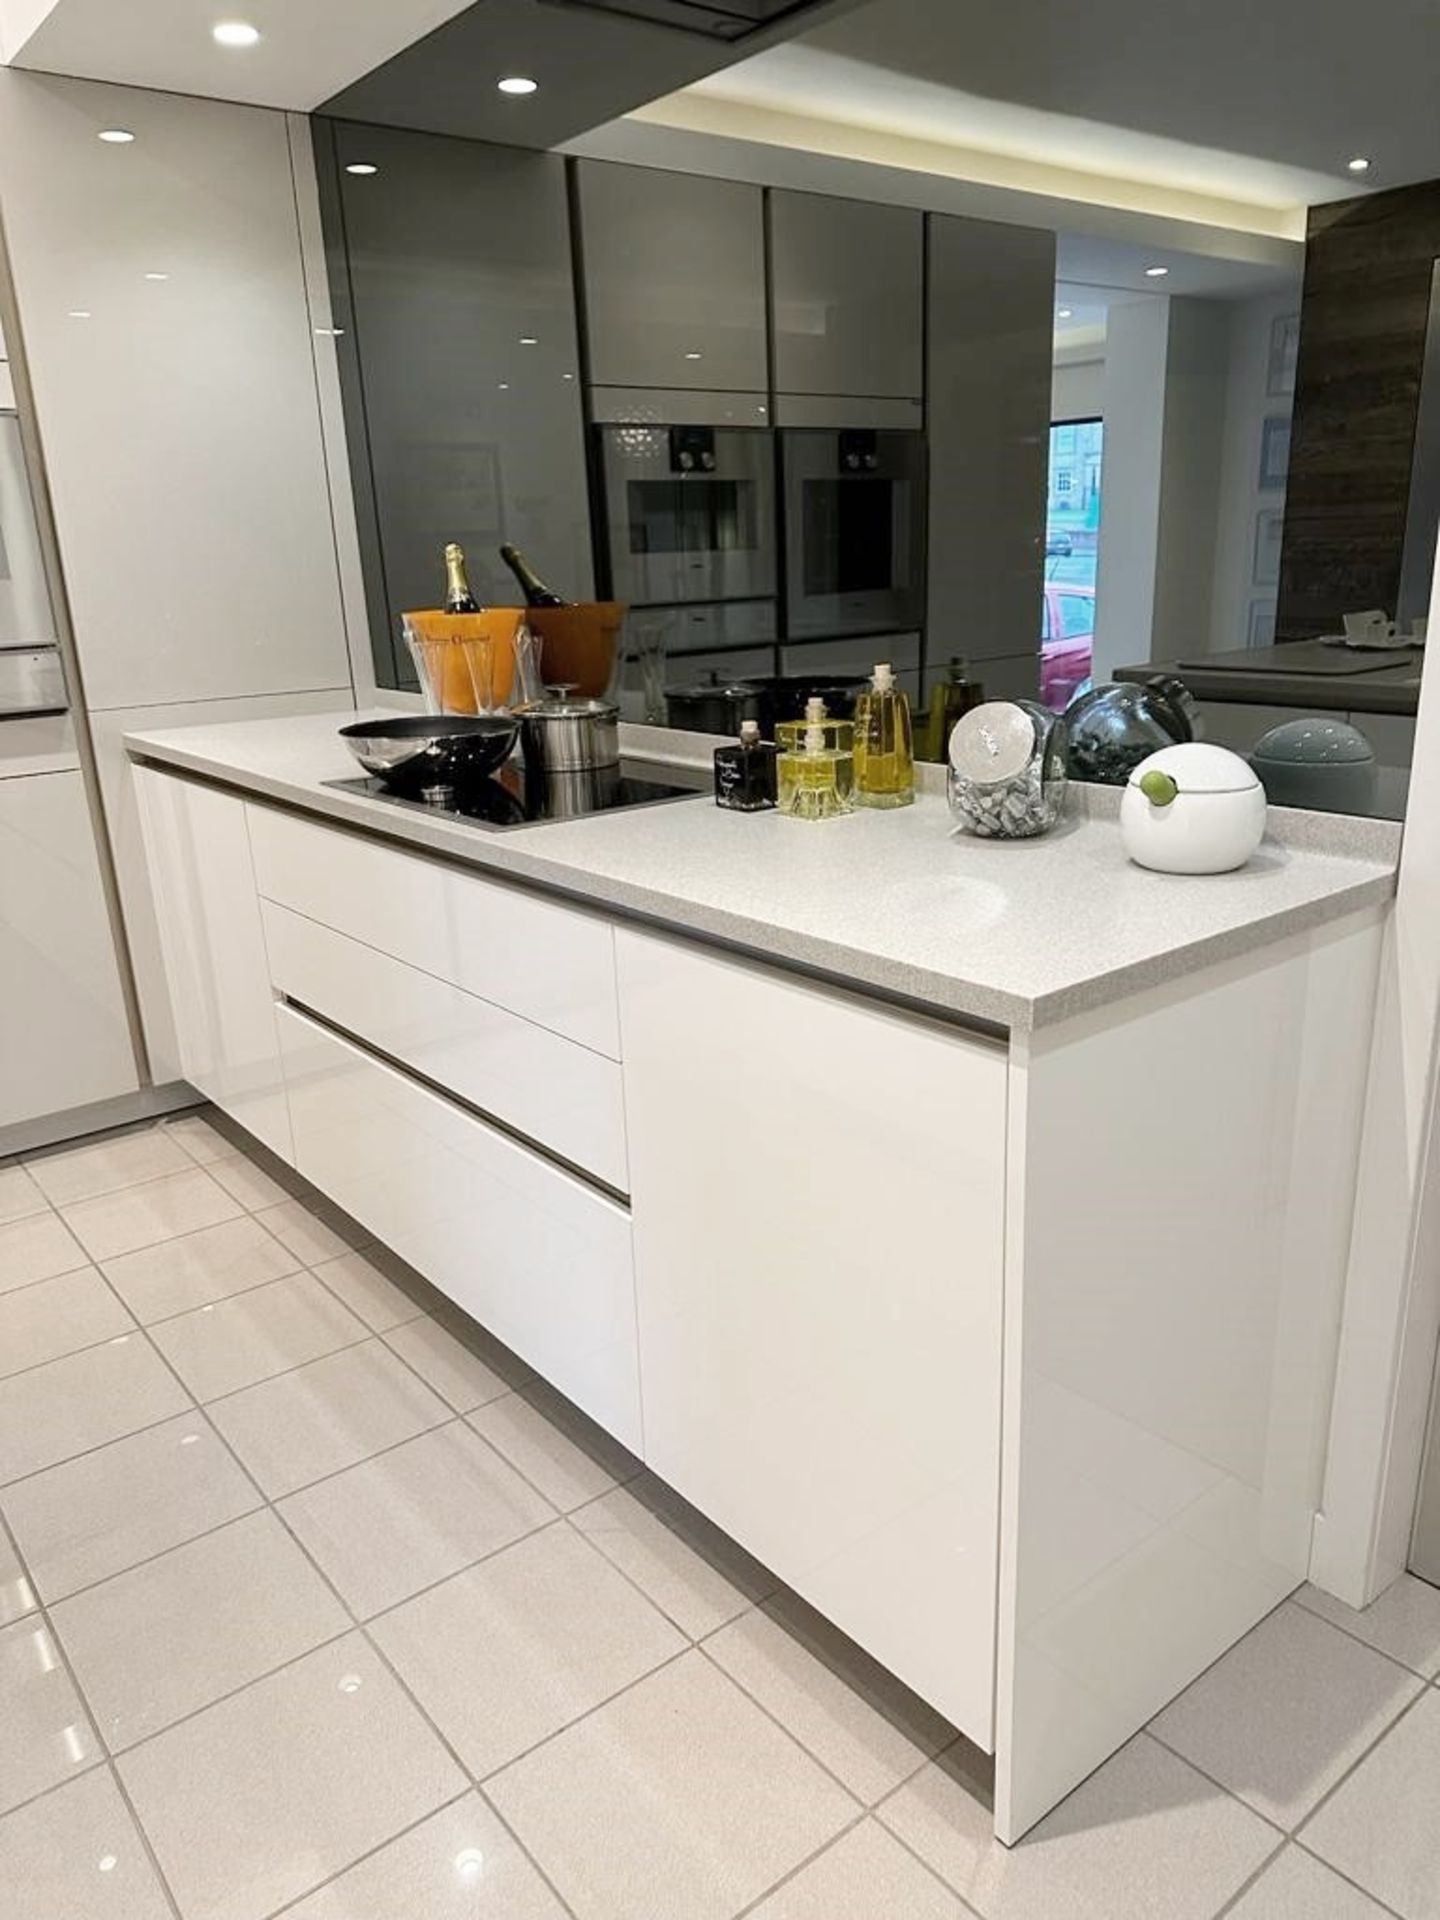 1 x SIEMATIC Contemporary 'S2' Fitted Kitchen In Gloss White And Grey *Ex-Display Showroom Model* - Image 2 of 16